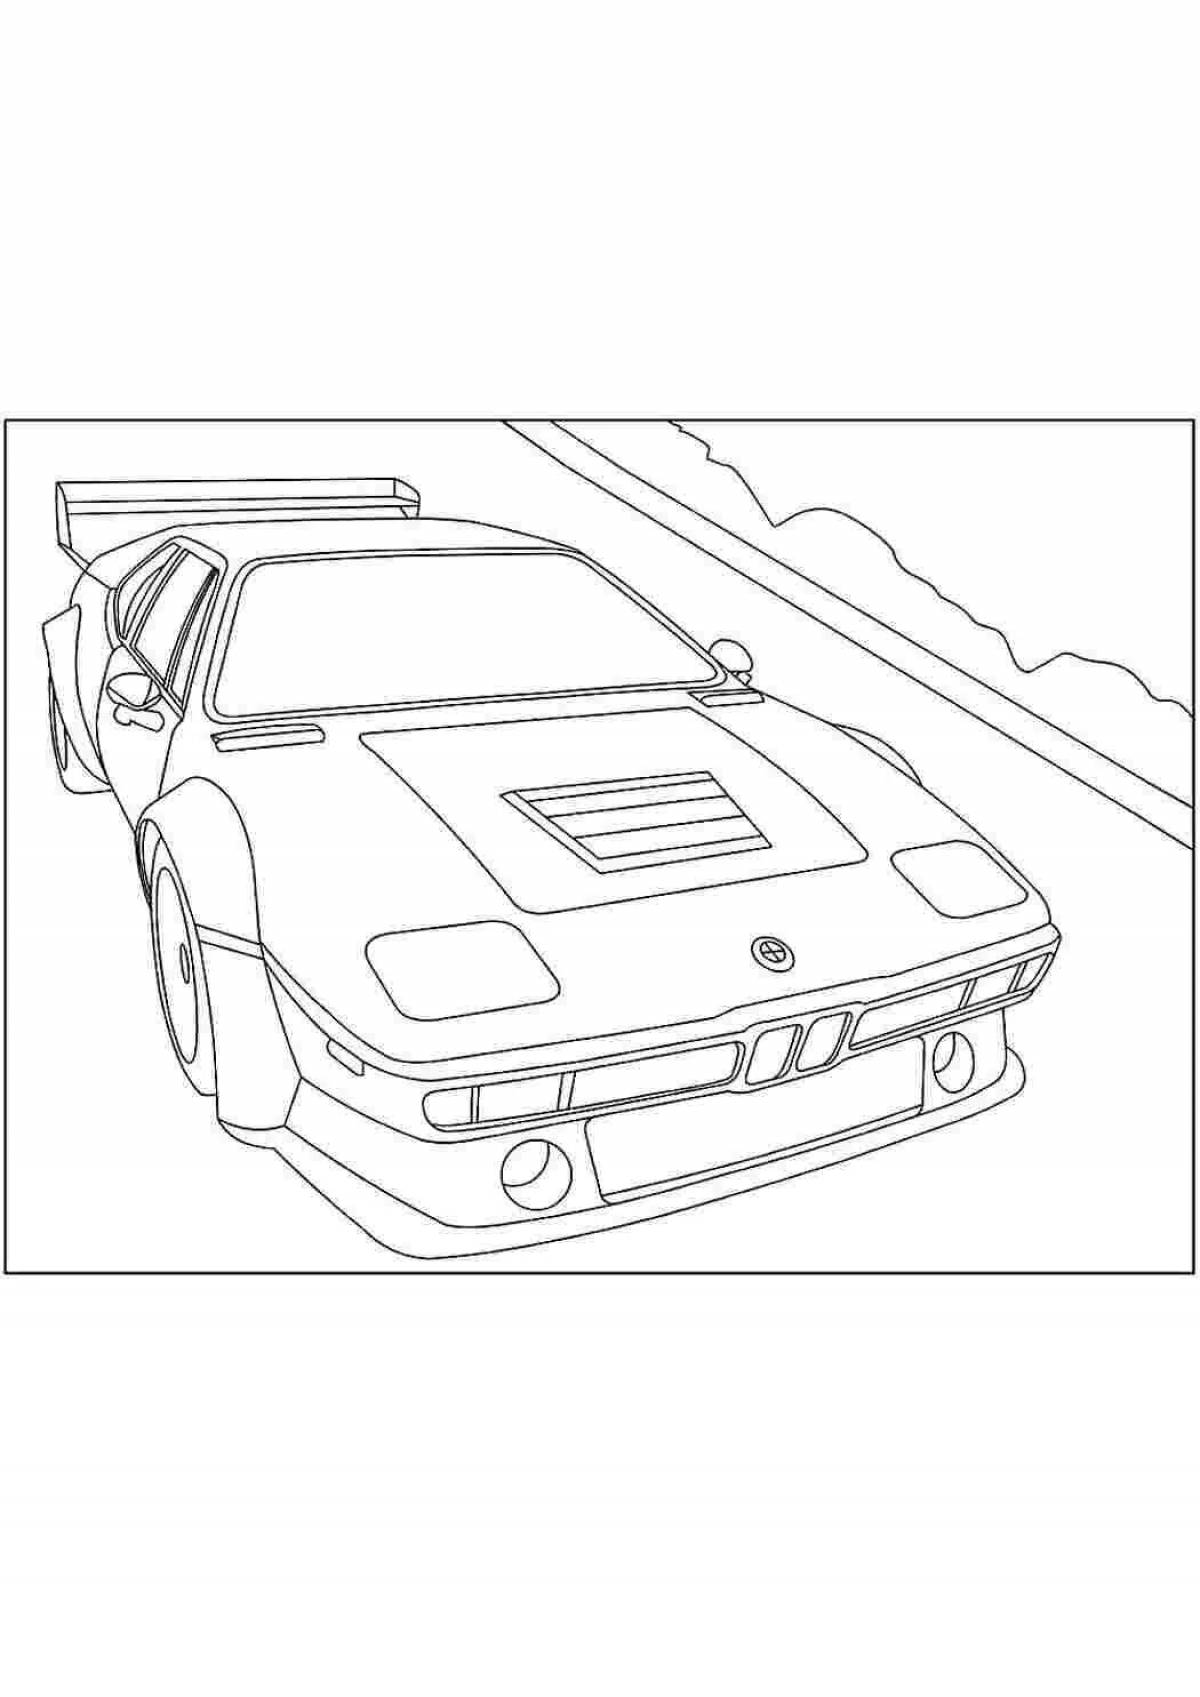 Bmw racing awesome coloring book